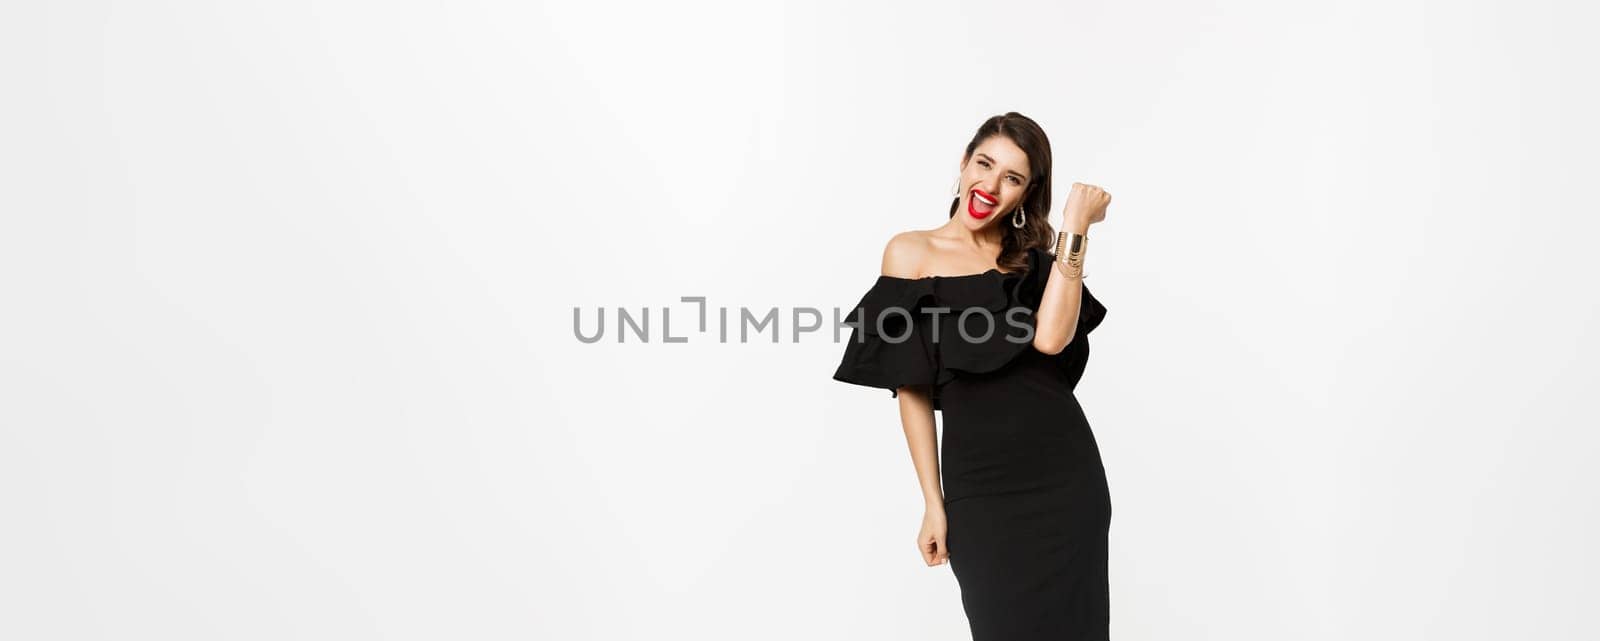 Beauty and fashion concept. Full length shot of happy young woman in luxury black dress, jewelry and heels, wearing makeup and looking satisfied, celebrating victory, winning, white background.